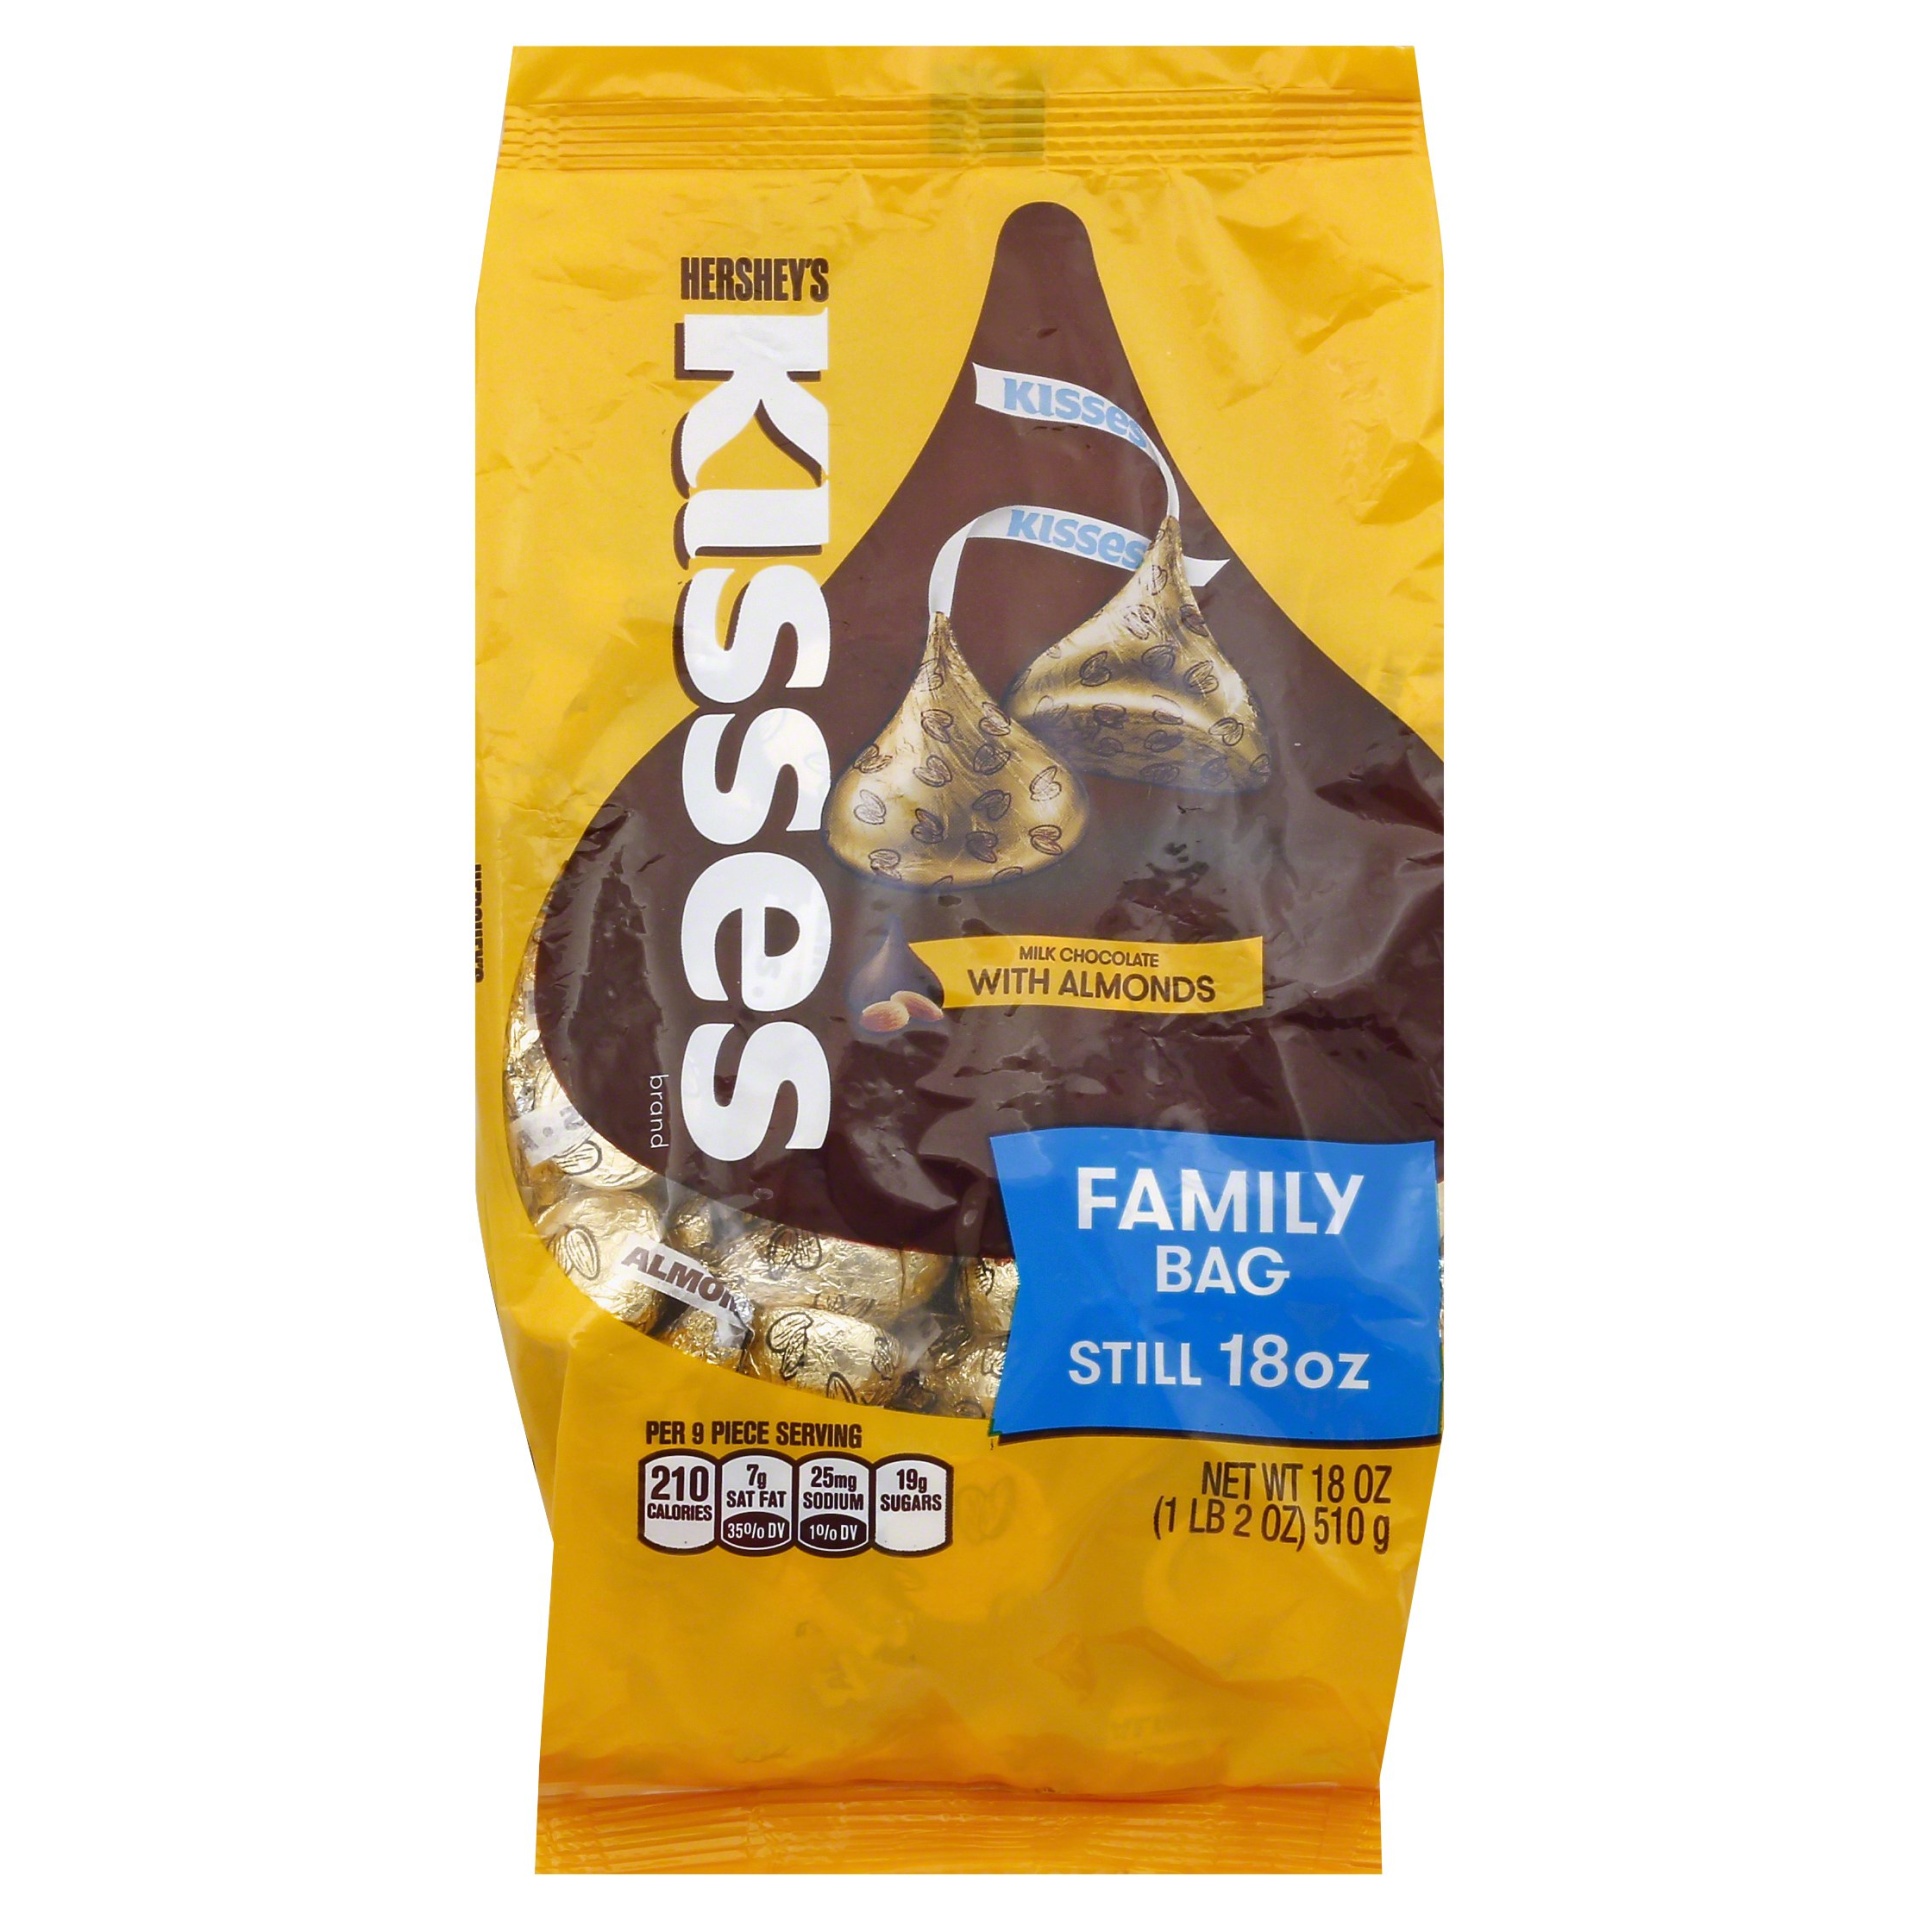 slide 1 of 8, Hershey's Kisses Milk Chocolate with Almonds Family Bag, 18 oz